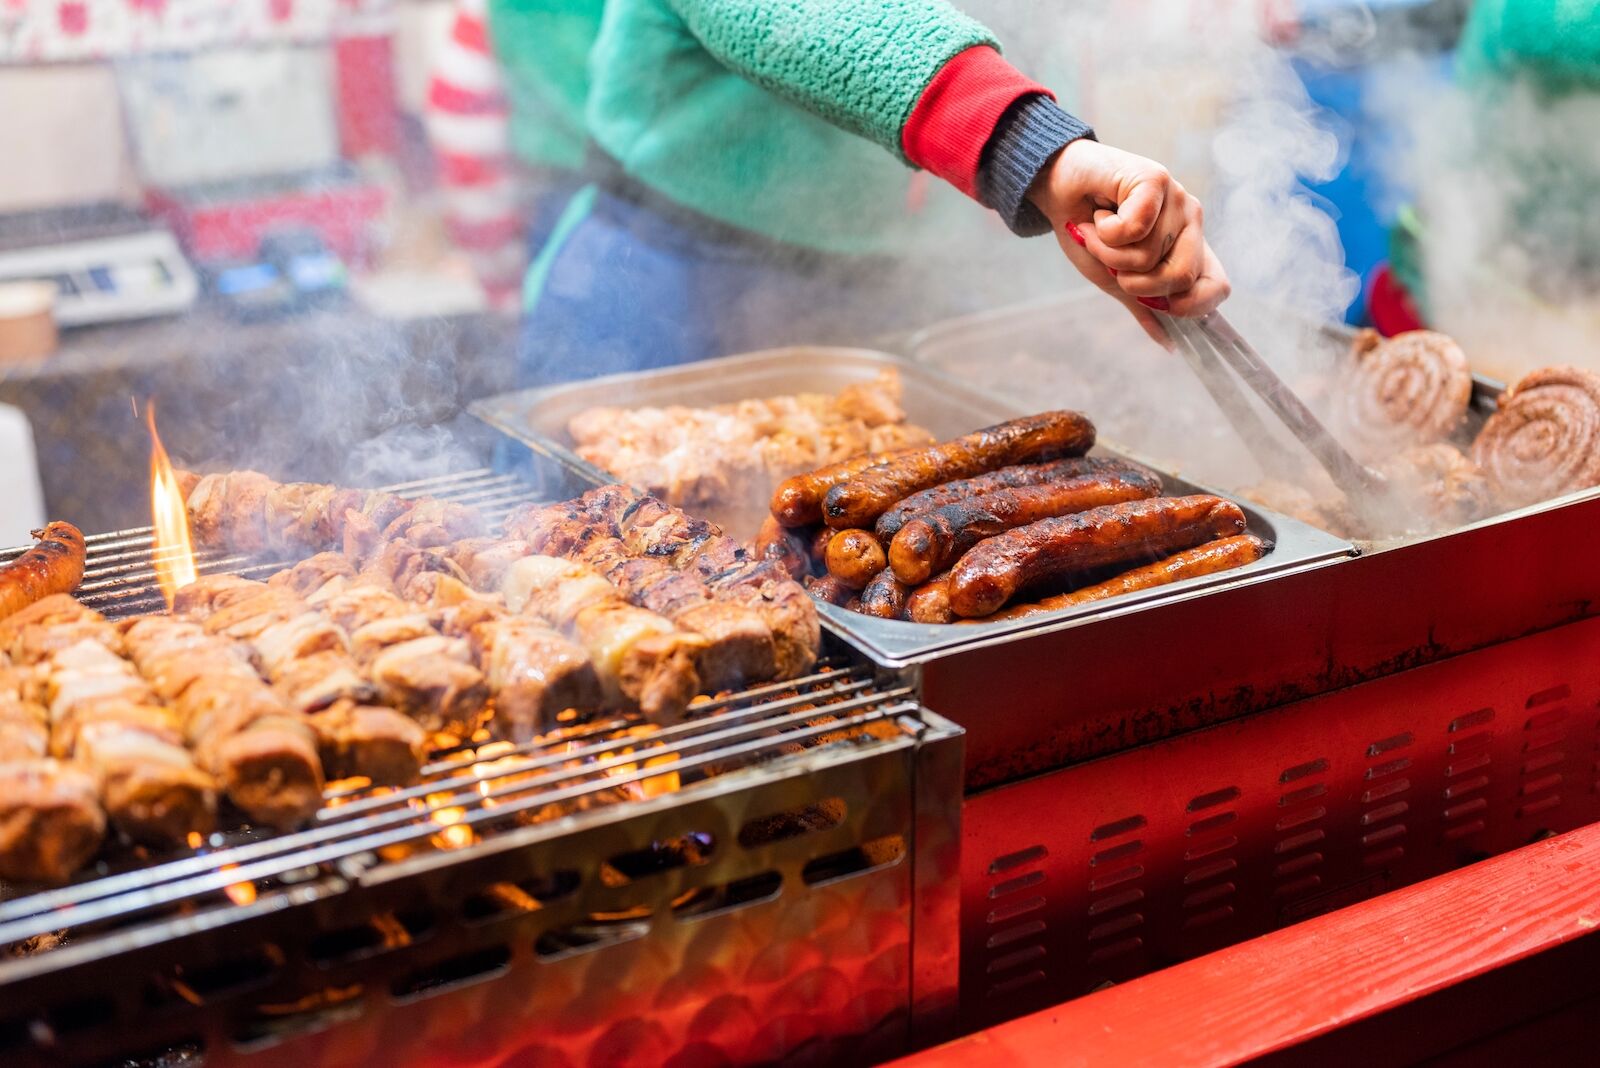 A woman with a pair of tongs in her hands grilling sausages and other meets at an outdoor food stall at the Gdansk Christmas markets, one of the best christmas markets in Europe